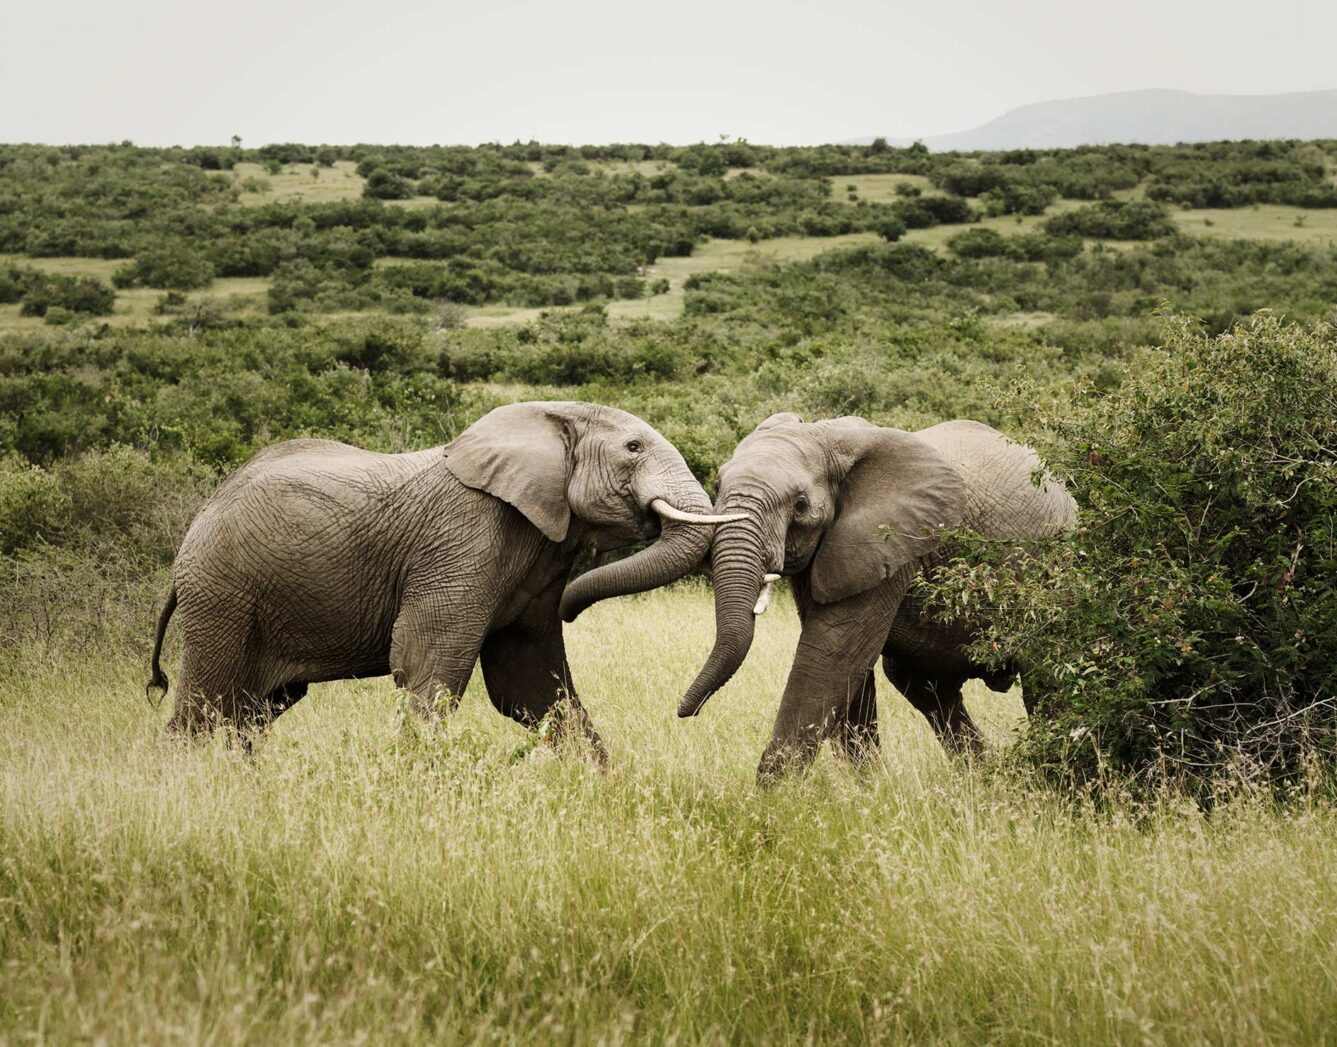 Two elephants touch faces in the grass